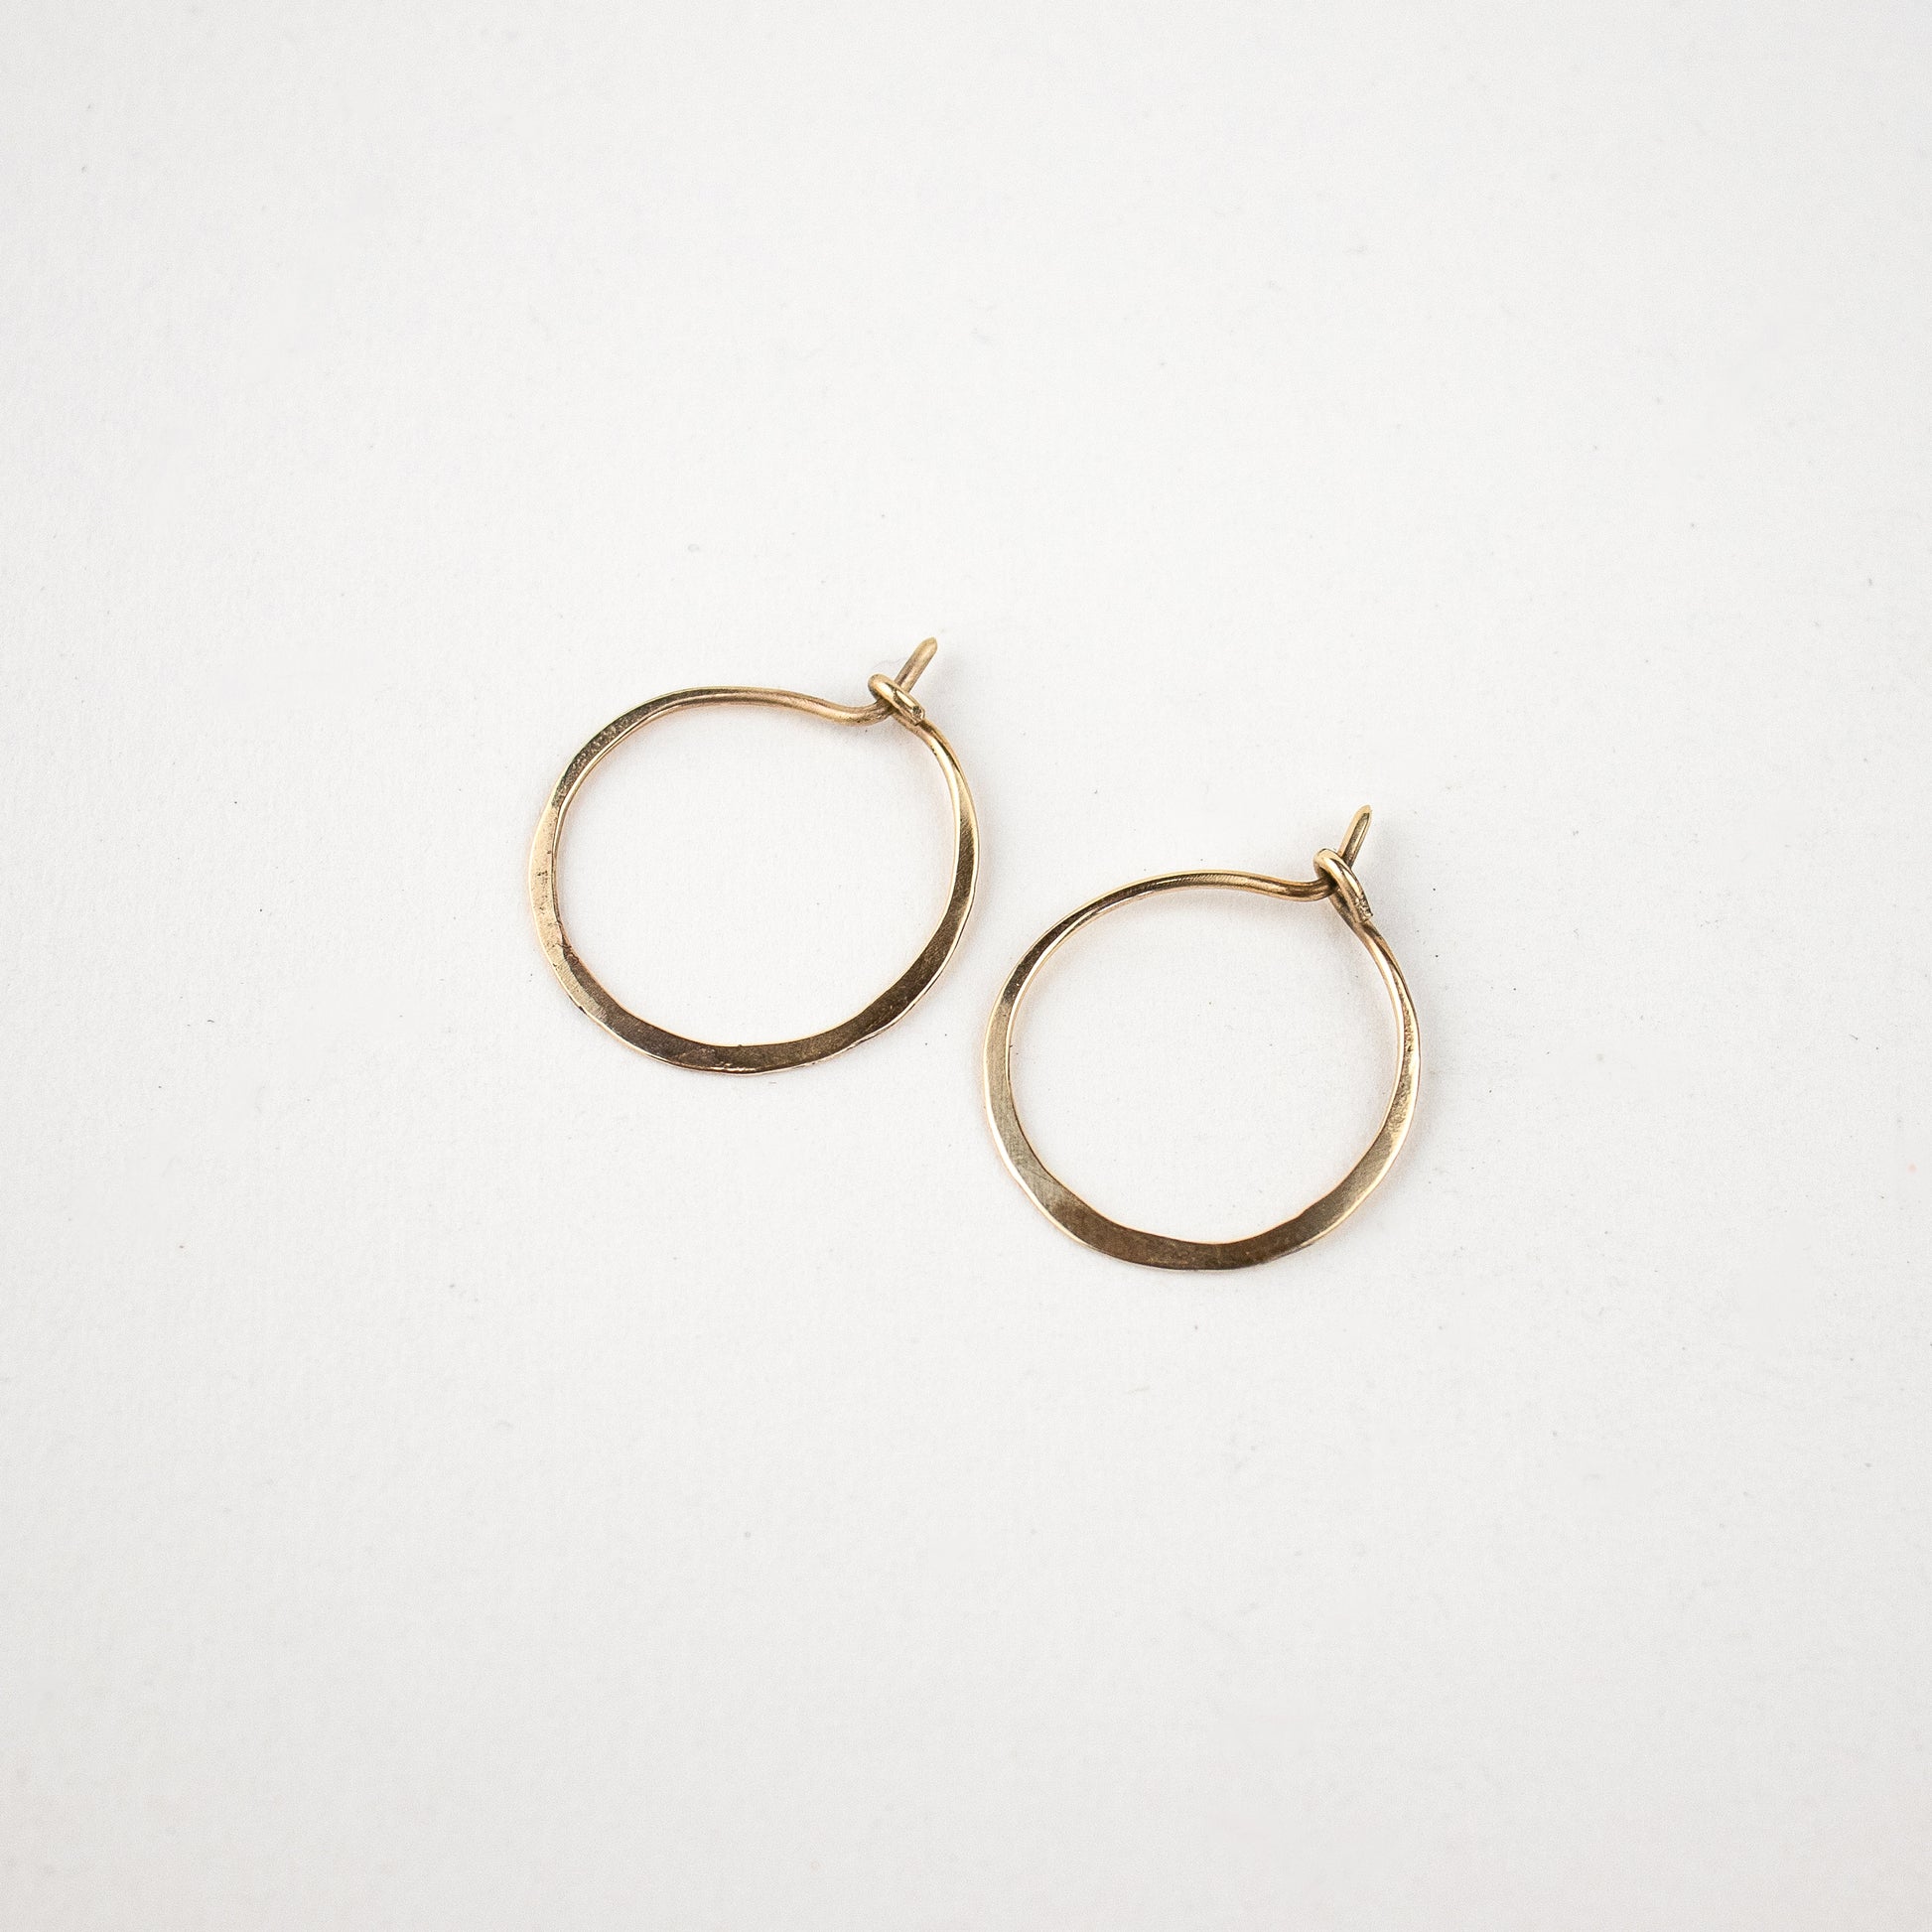 Solid reclaimed 10k gold hammer-finished hoop earrings measuring 1 inch in diameter handmade and finished in our Catskills store-studio.